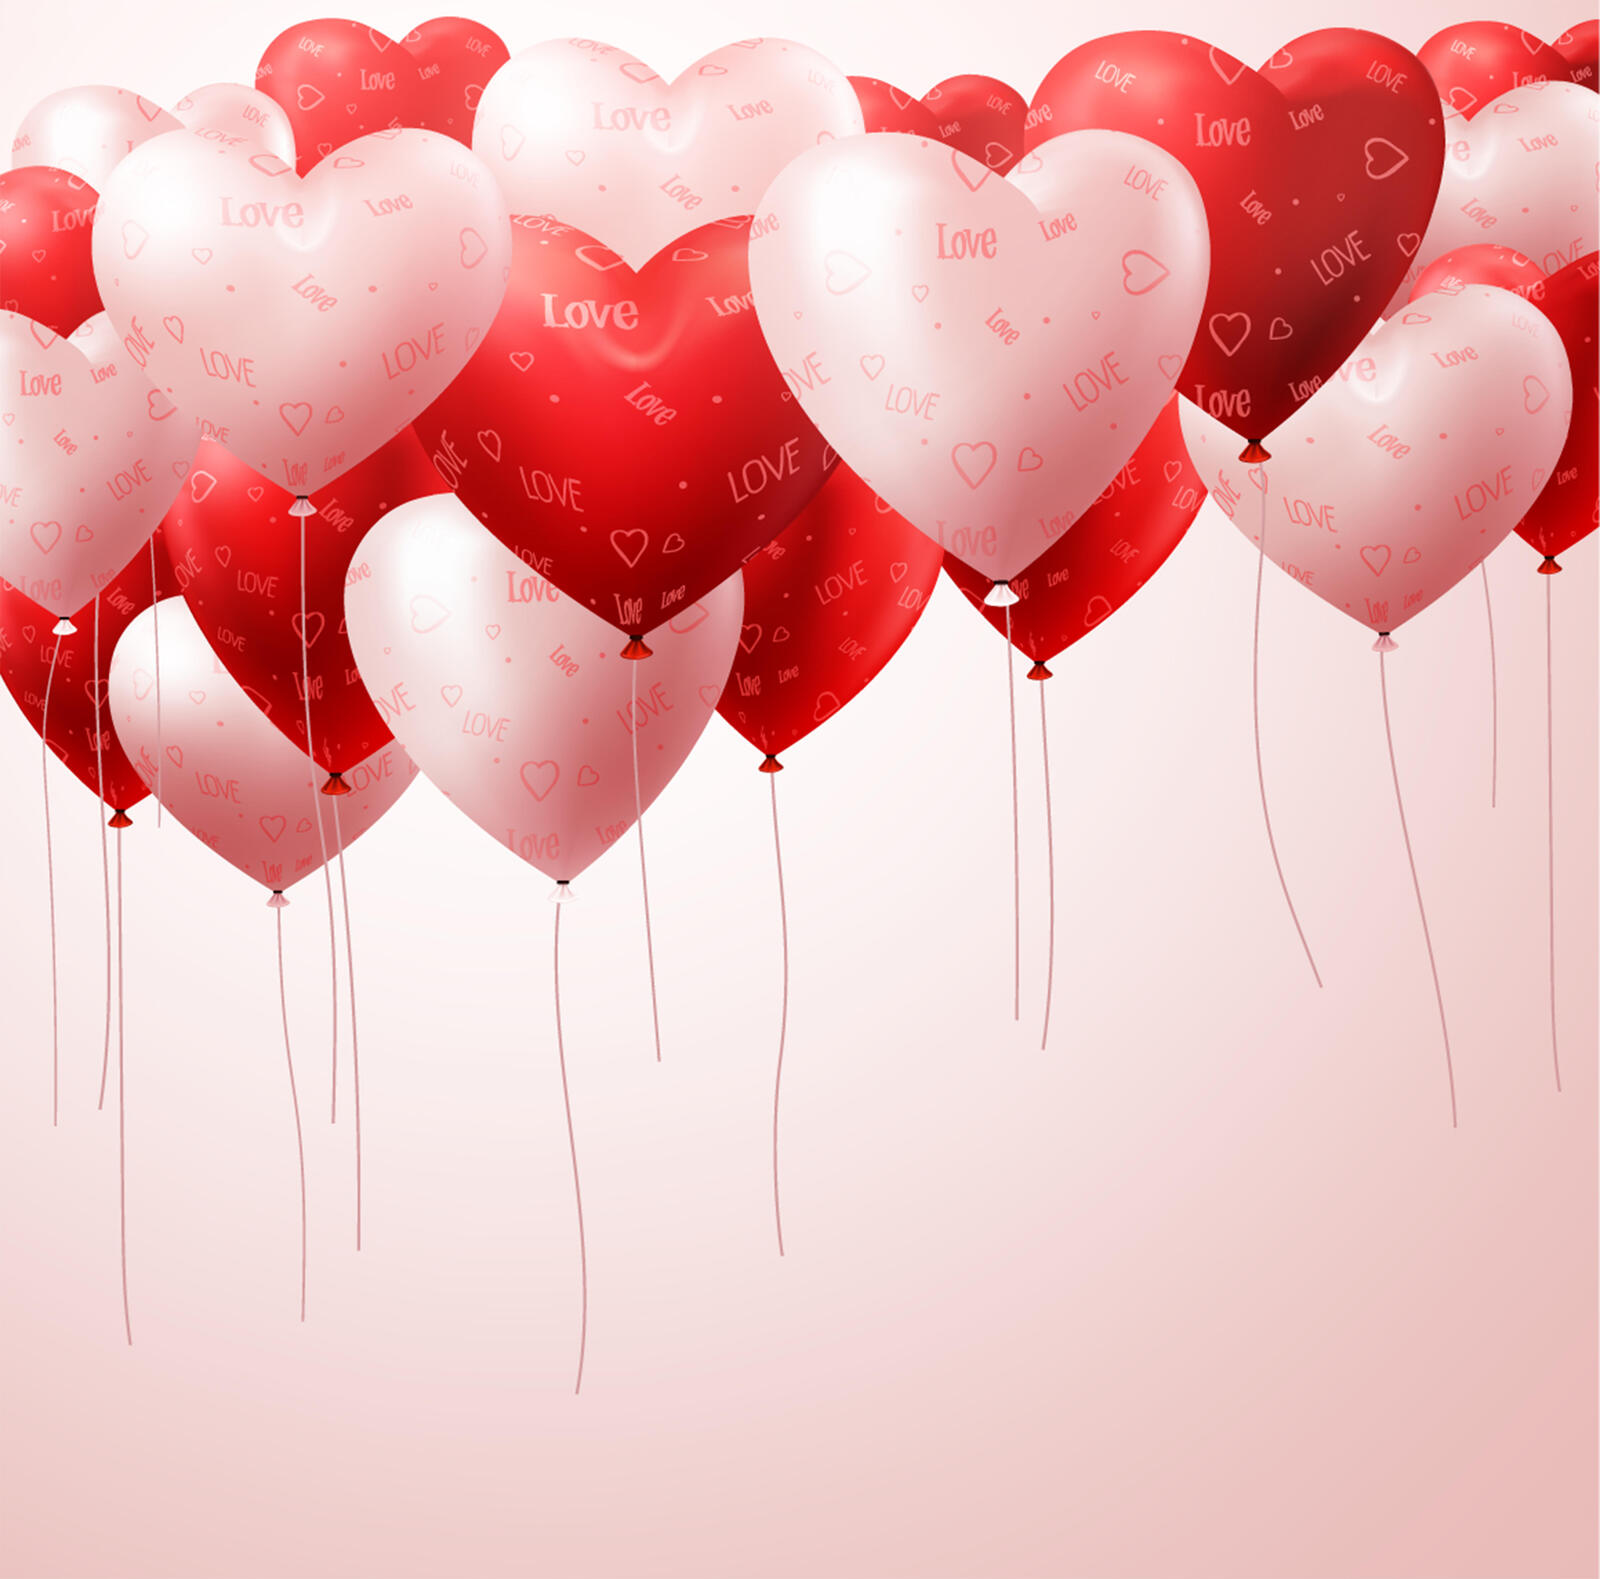 Wallpapers romantic hearts holidays valentines on the desktop